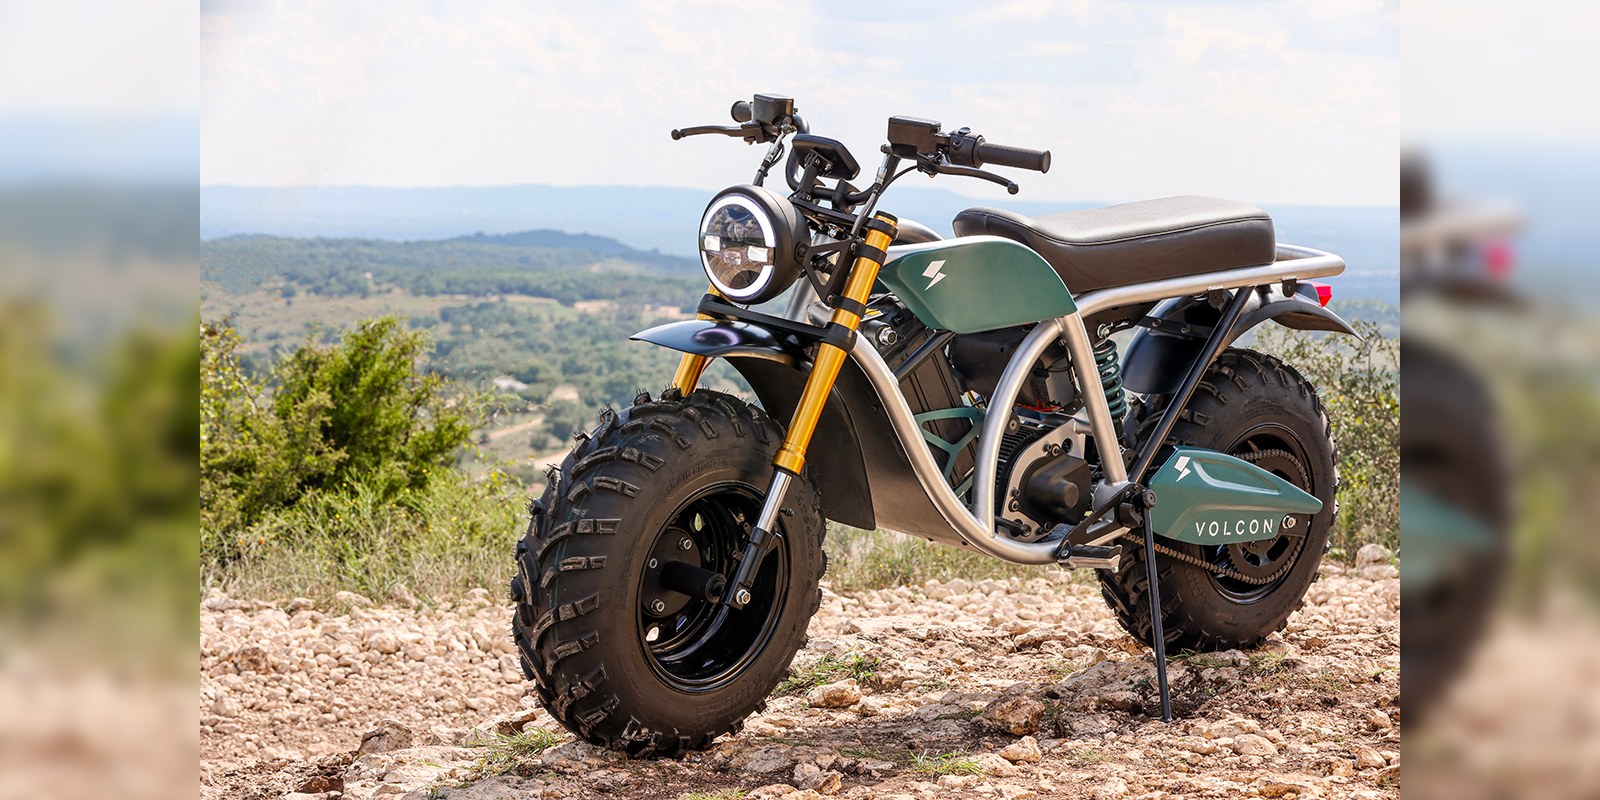 Volcon Grunt unveiled as affordable 60 MPH US-made electric motorcycle